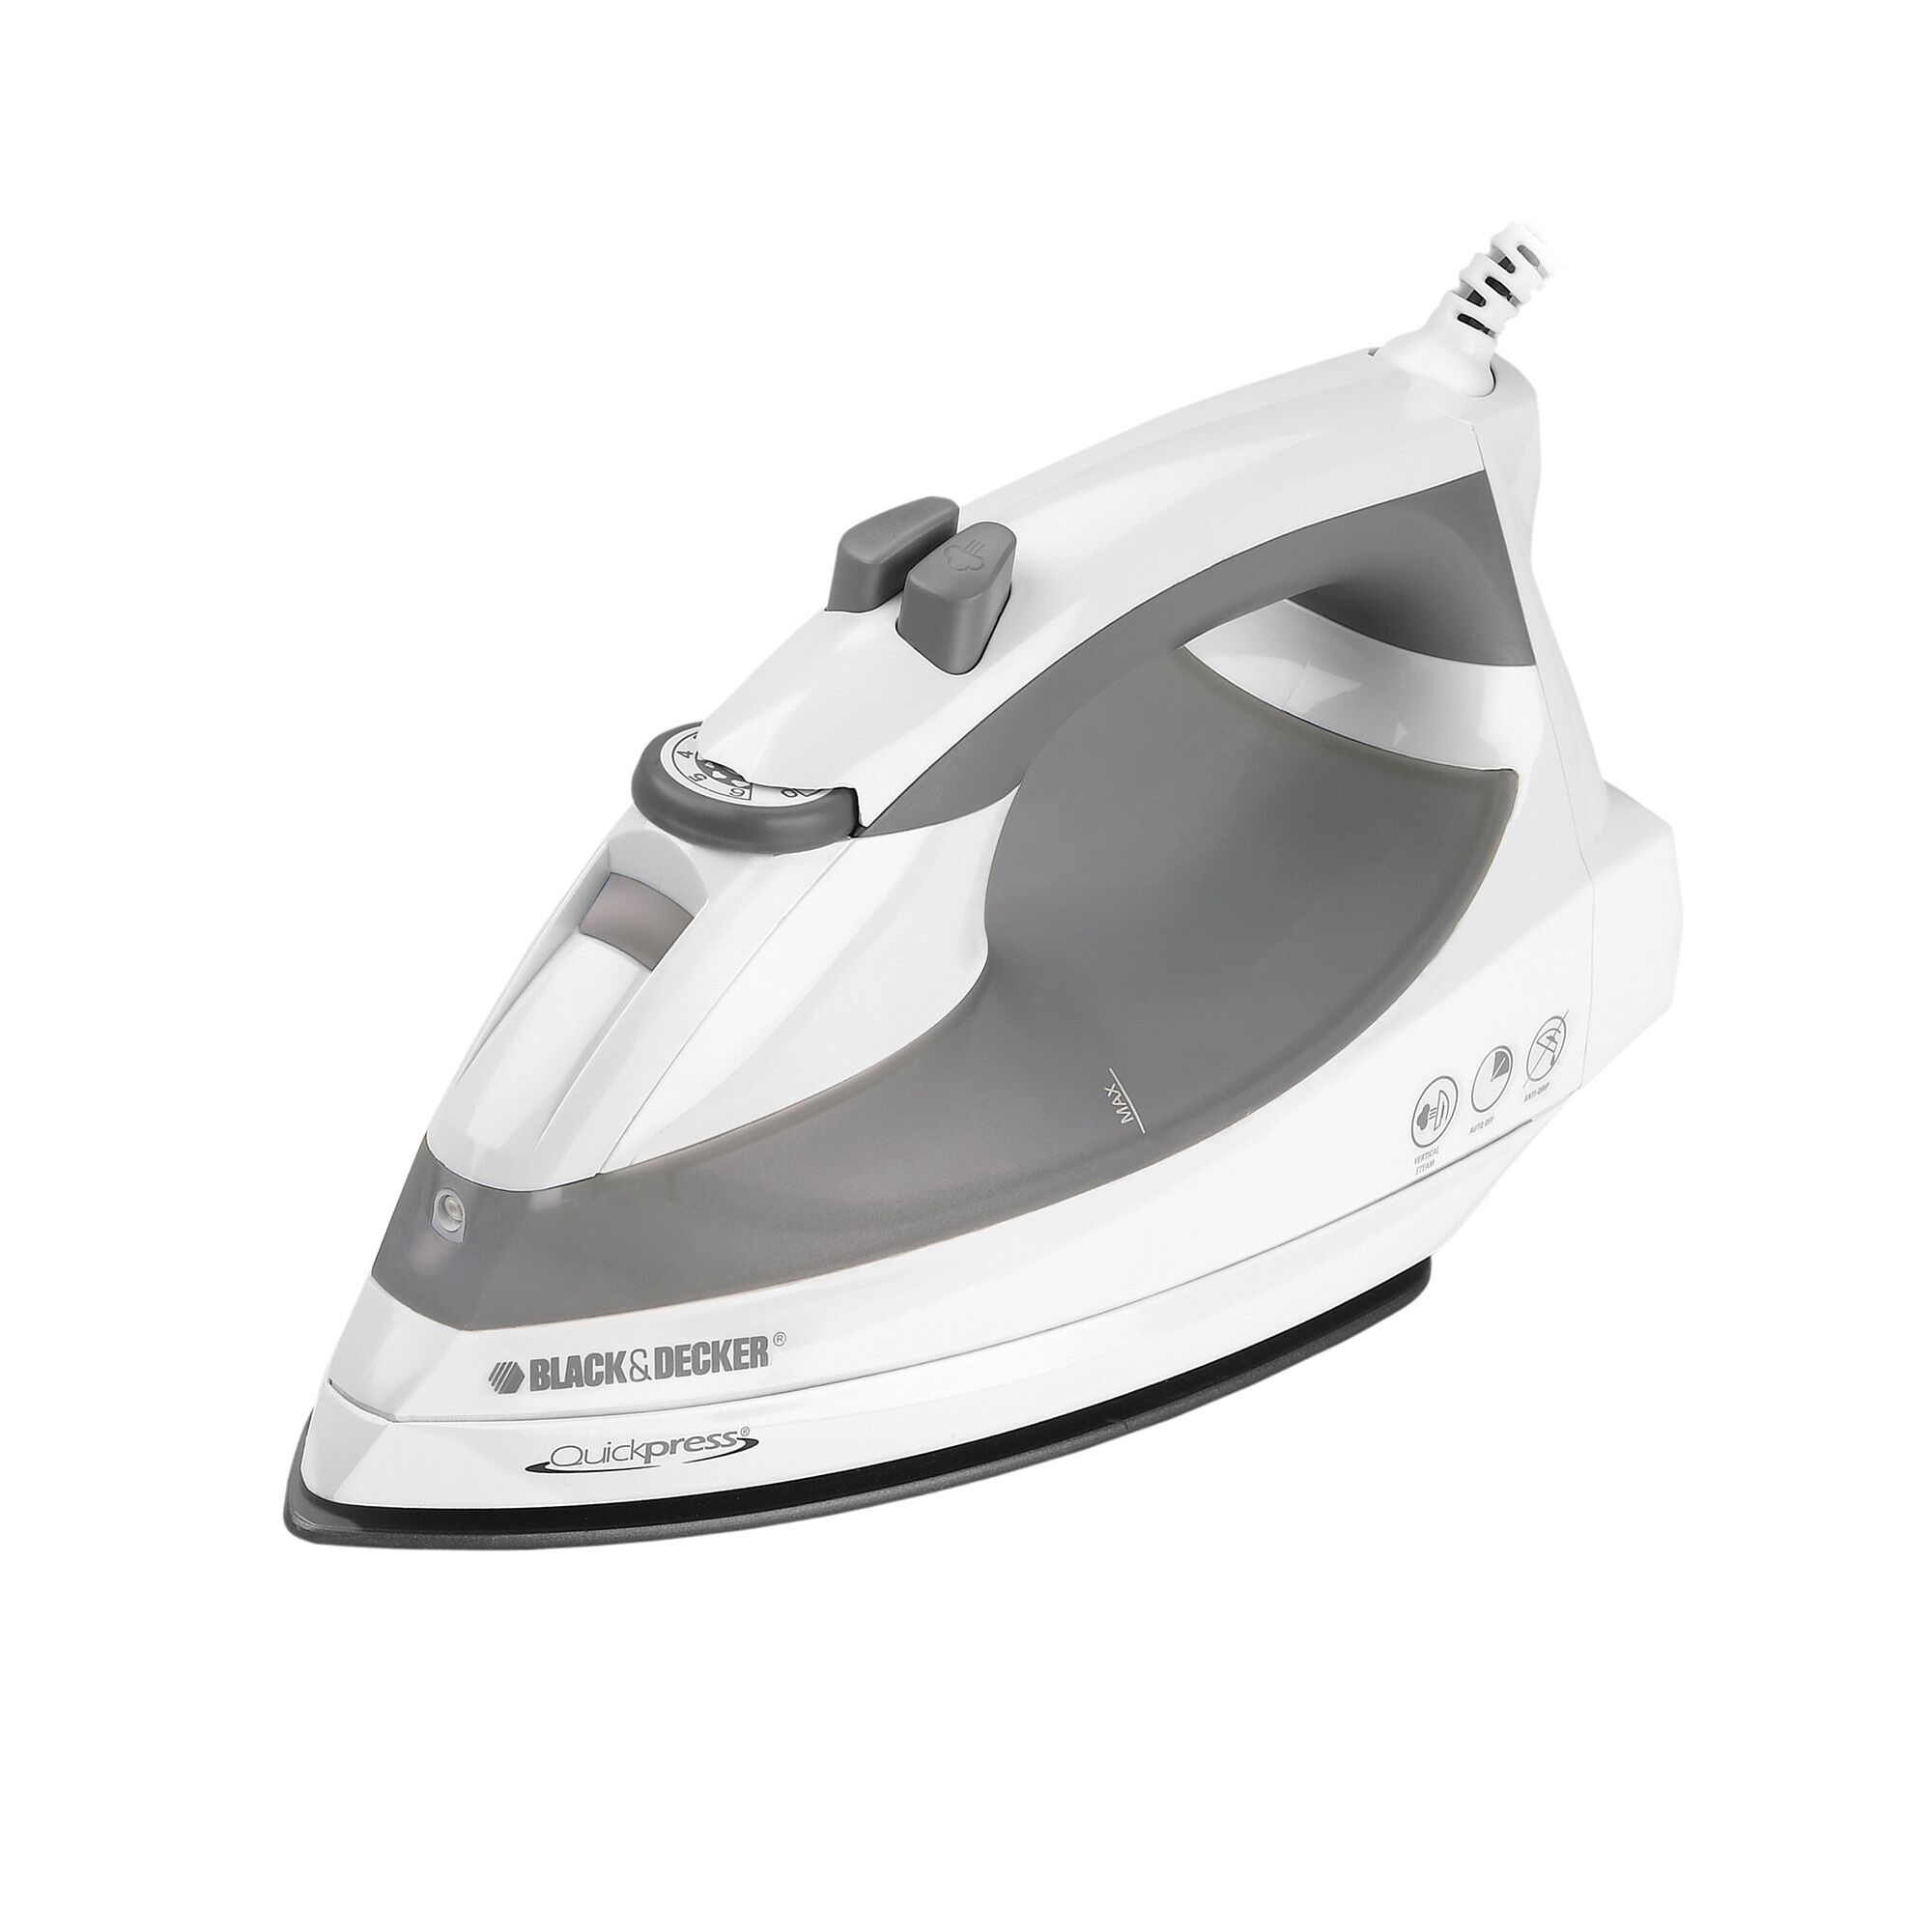 Quick press Iron with Smart Steam Technology.